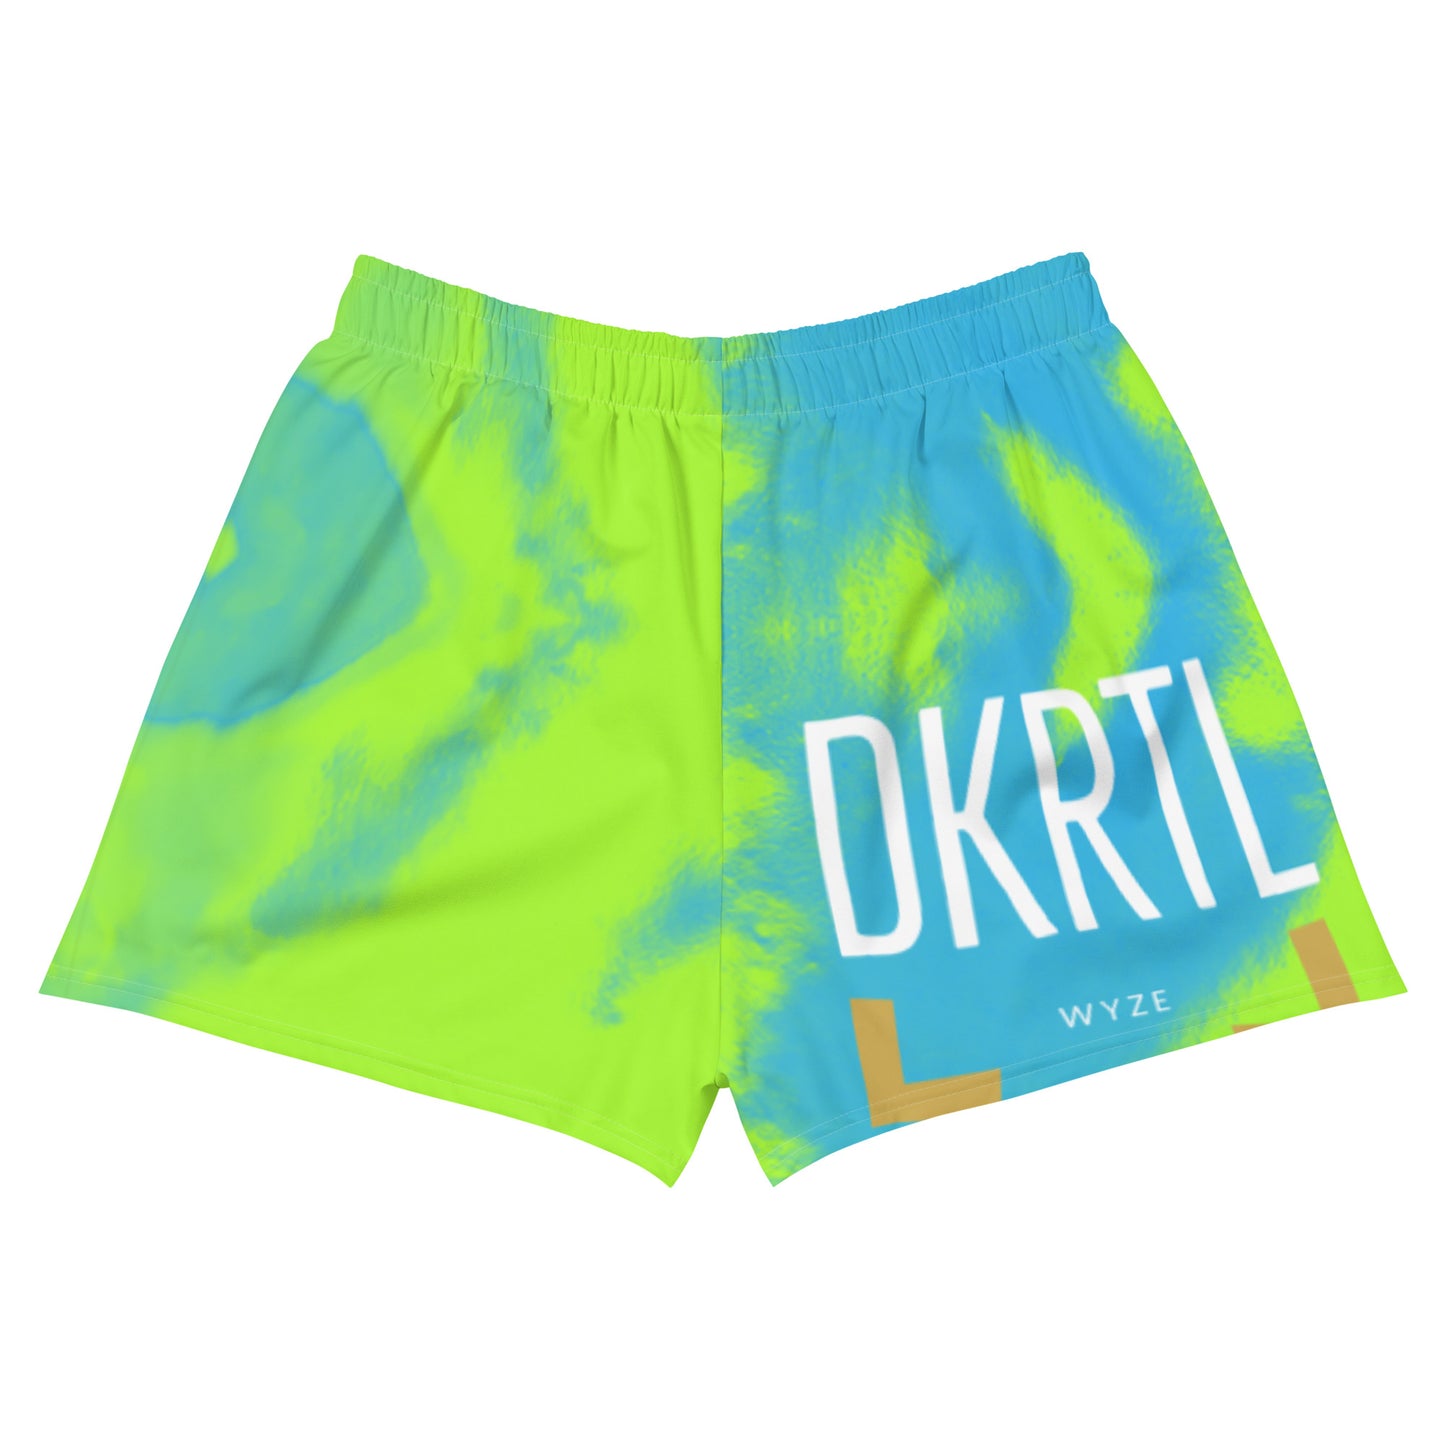 Cotton Candy Athletic Shorts